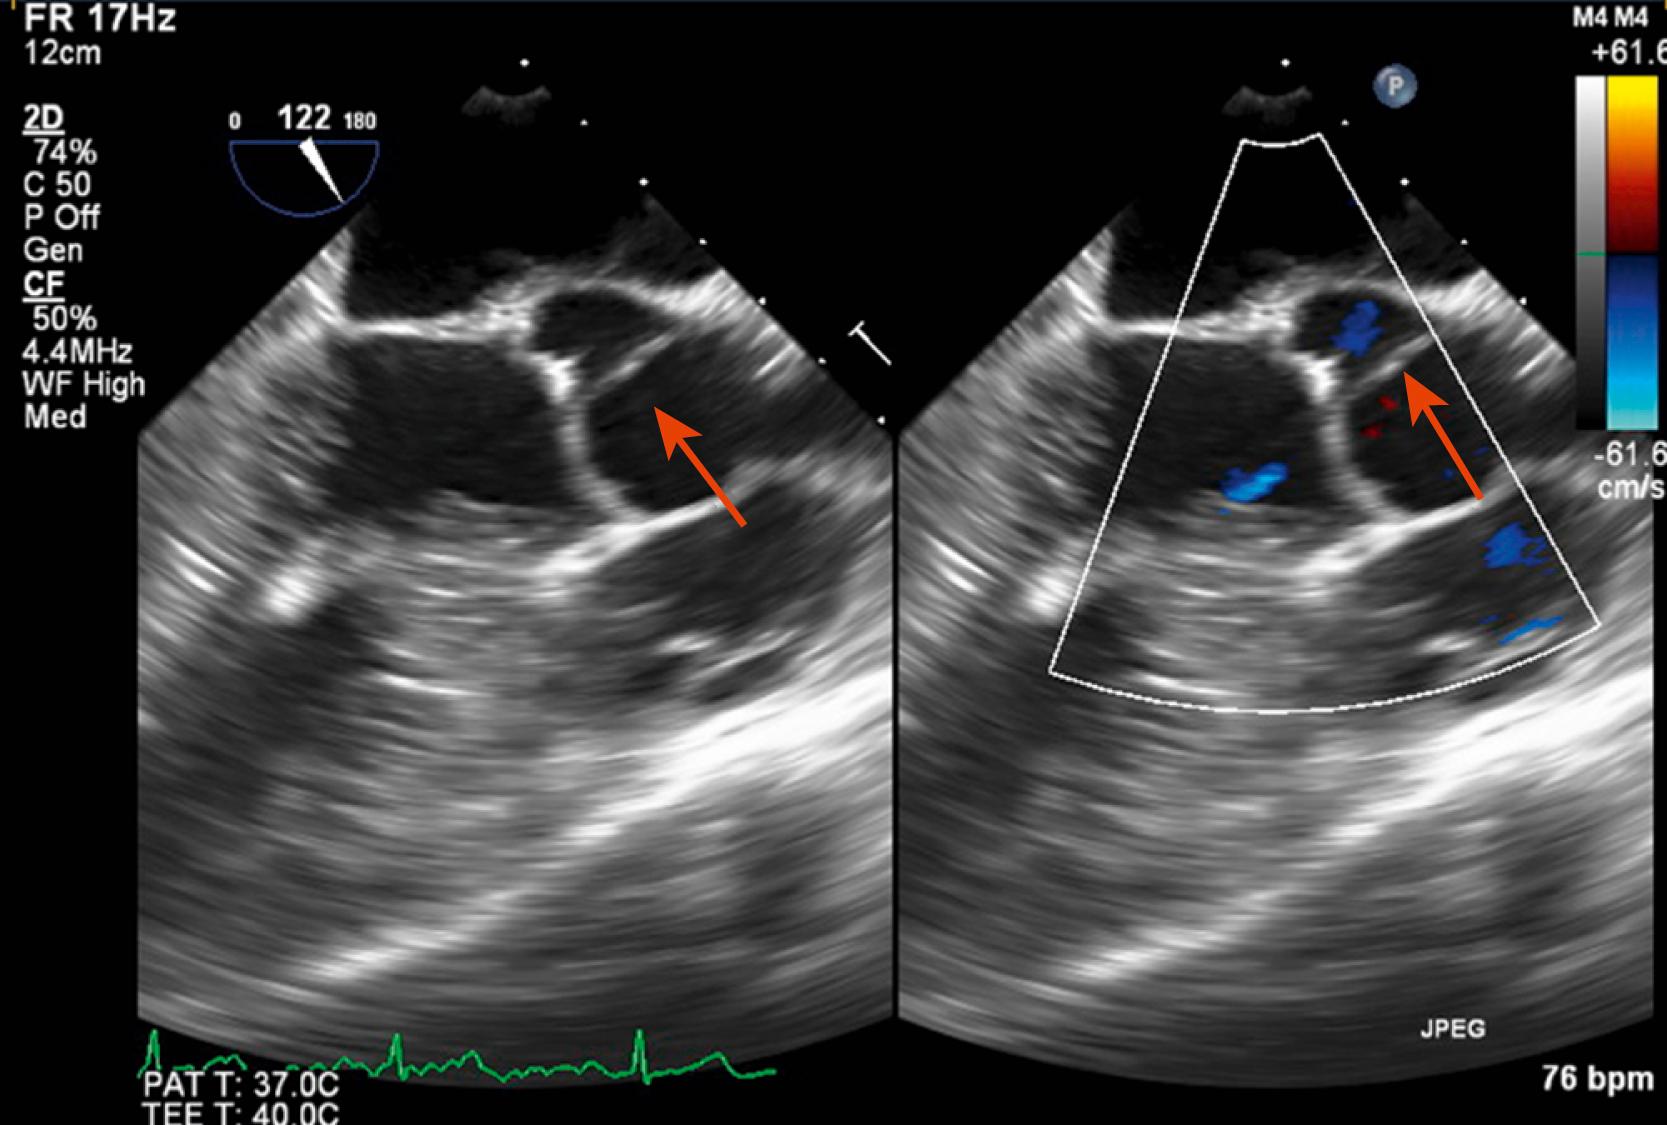 Figure 15.6, Midesophageal 122-degree view of Lambl excrescences (red arrow) misinterpreted as an aortic valve vegetation. (Also see Video 15.6 .)